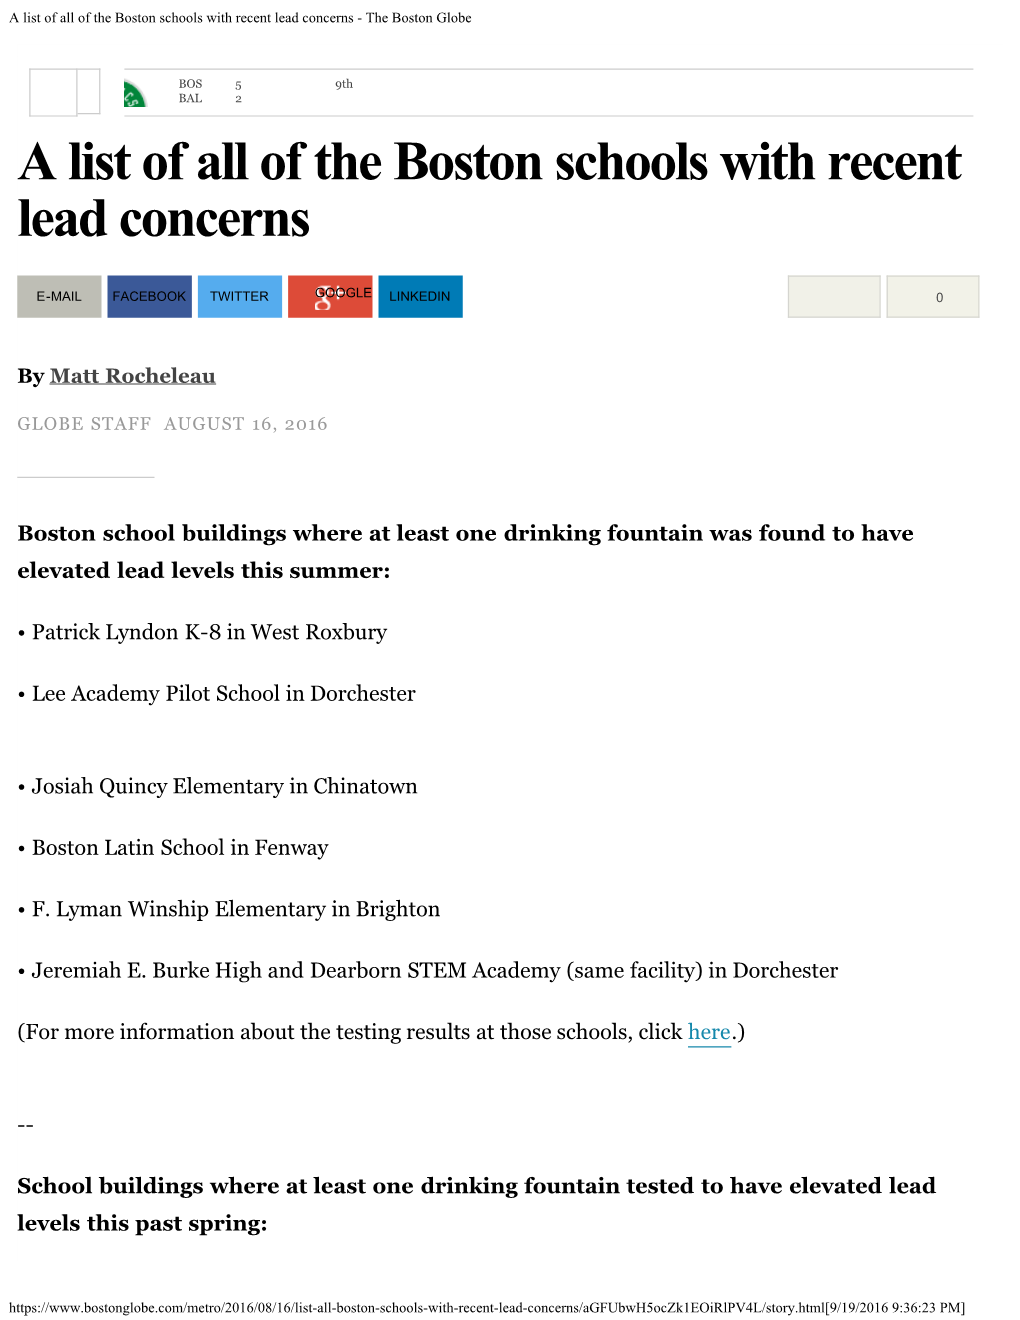 A List of All of the Boston Schools with Recent Lead Concerns - the Boston Globe